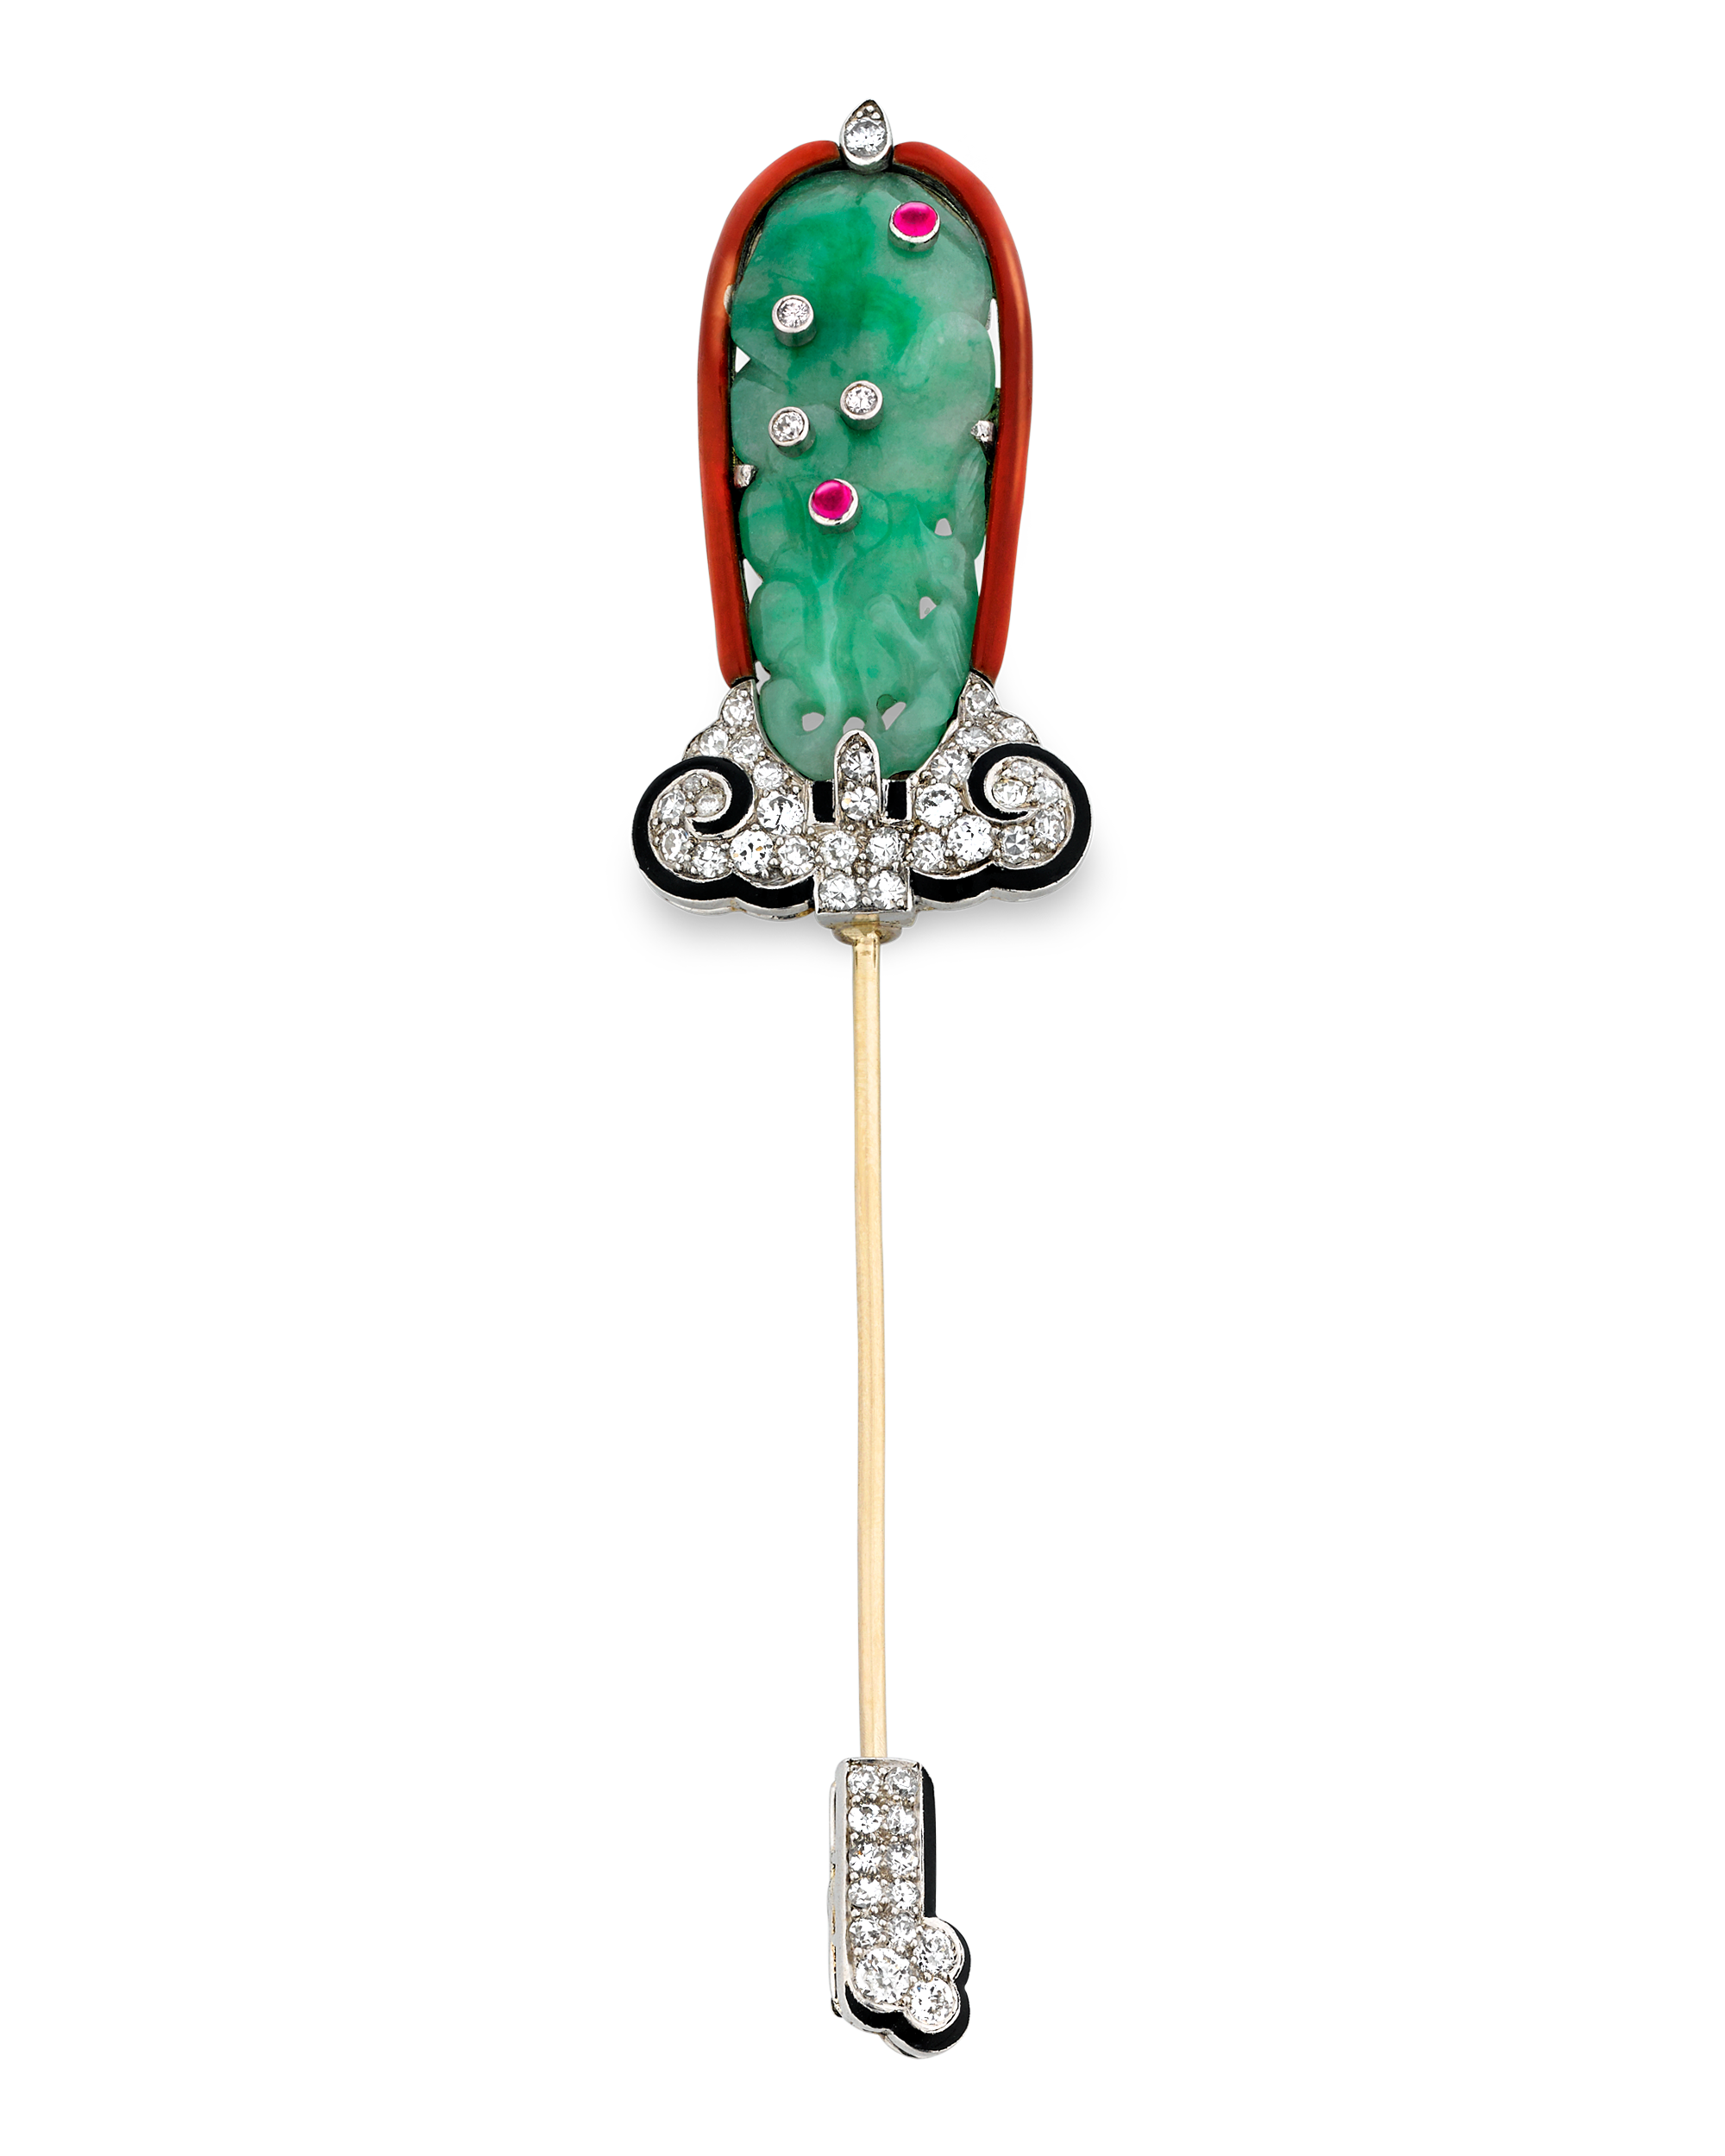 This exquisite jade jabot pin by Cartier epitomizes Art Deco era sophistication